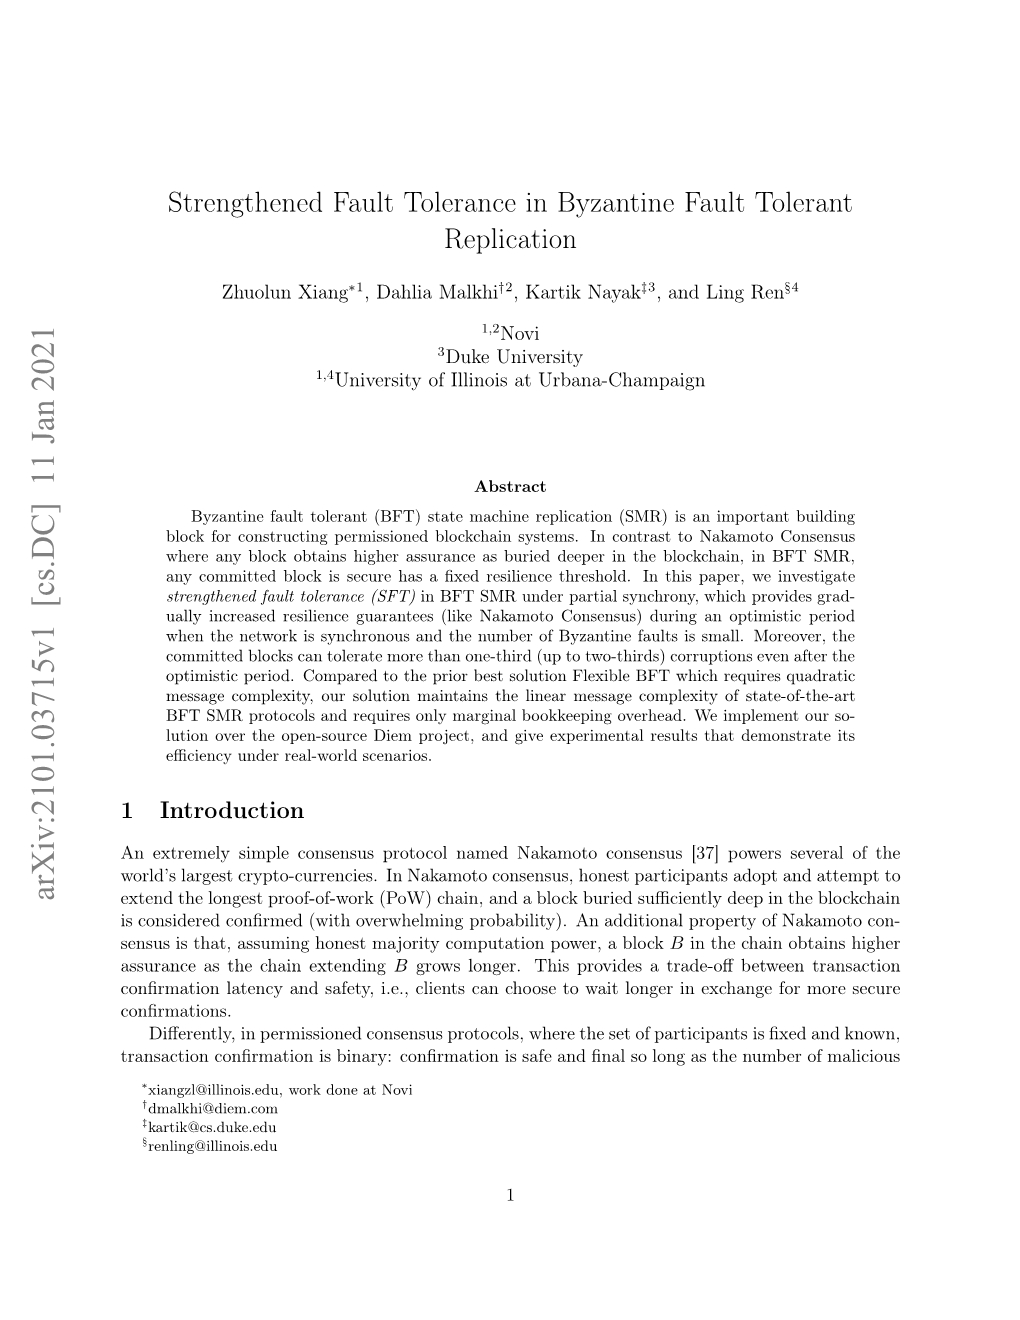 Strengthened Fault Tolerance in Byzantine Fault Tolerant Replication